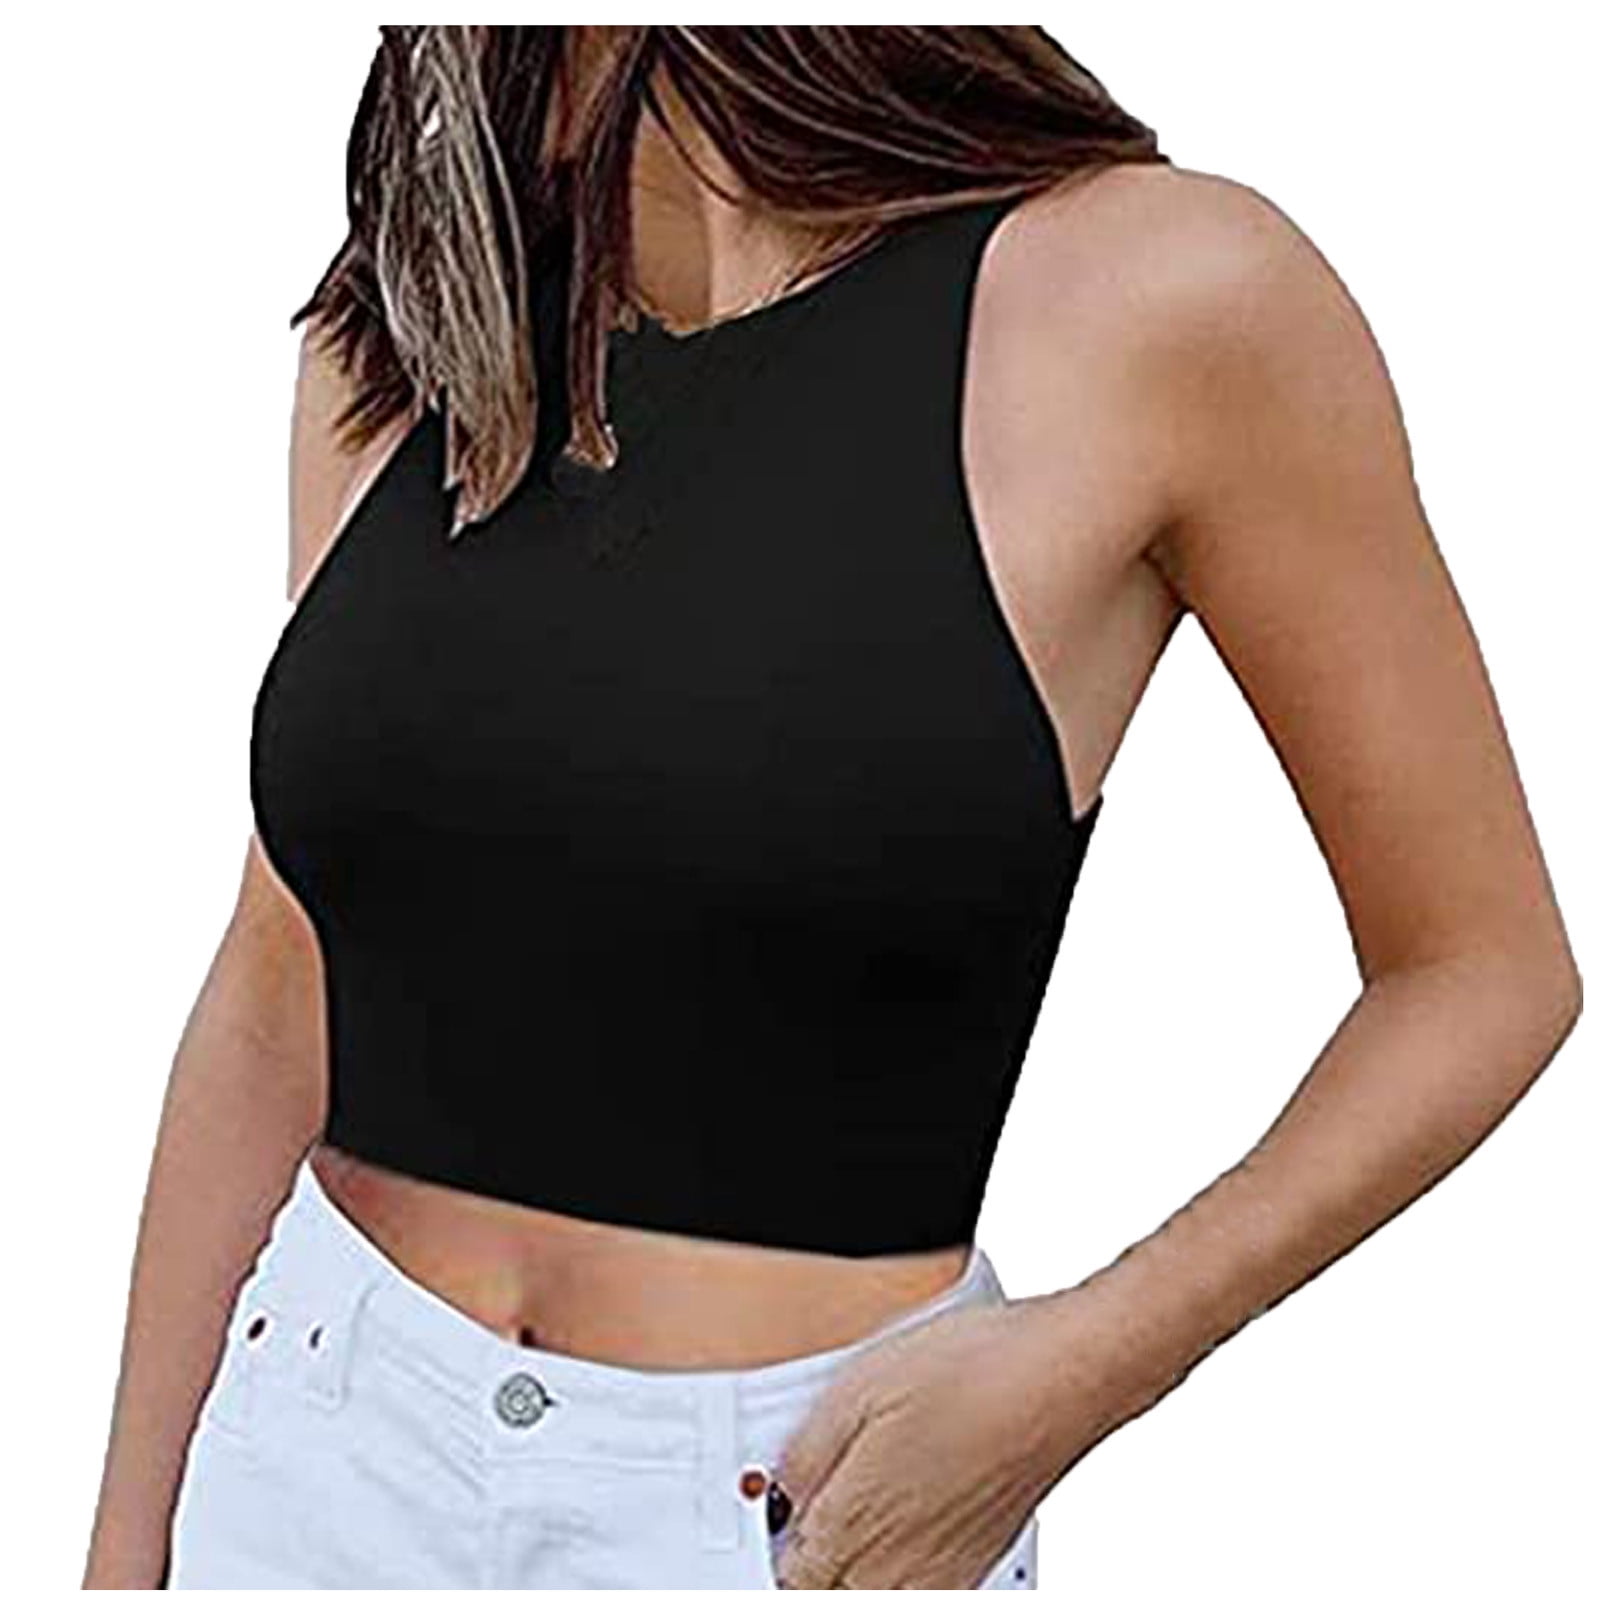 YYDGH Women's Knit Crop Top Ribbed Sleeveless Halter Neck Vest